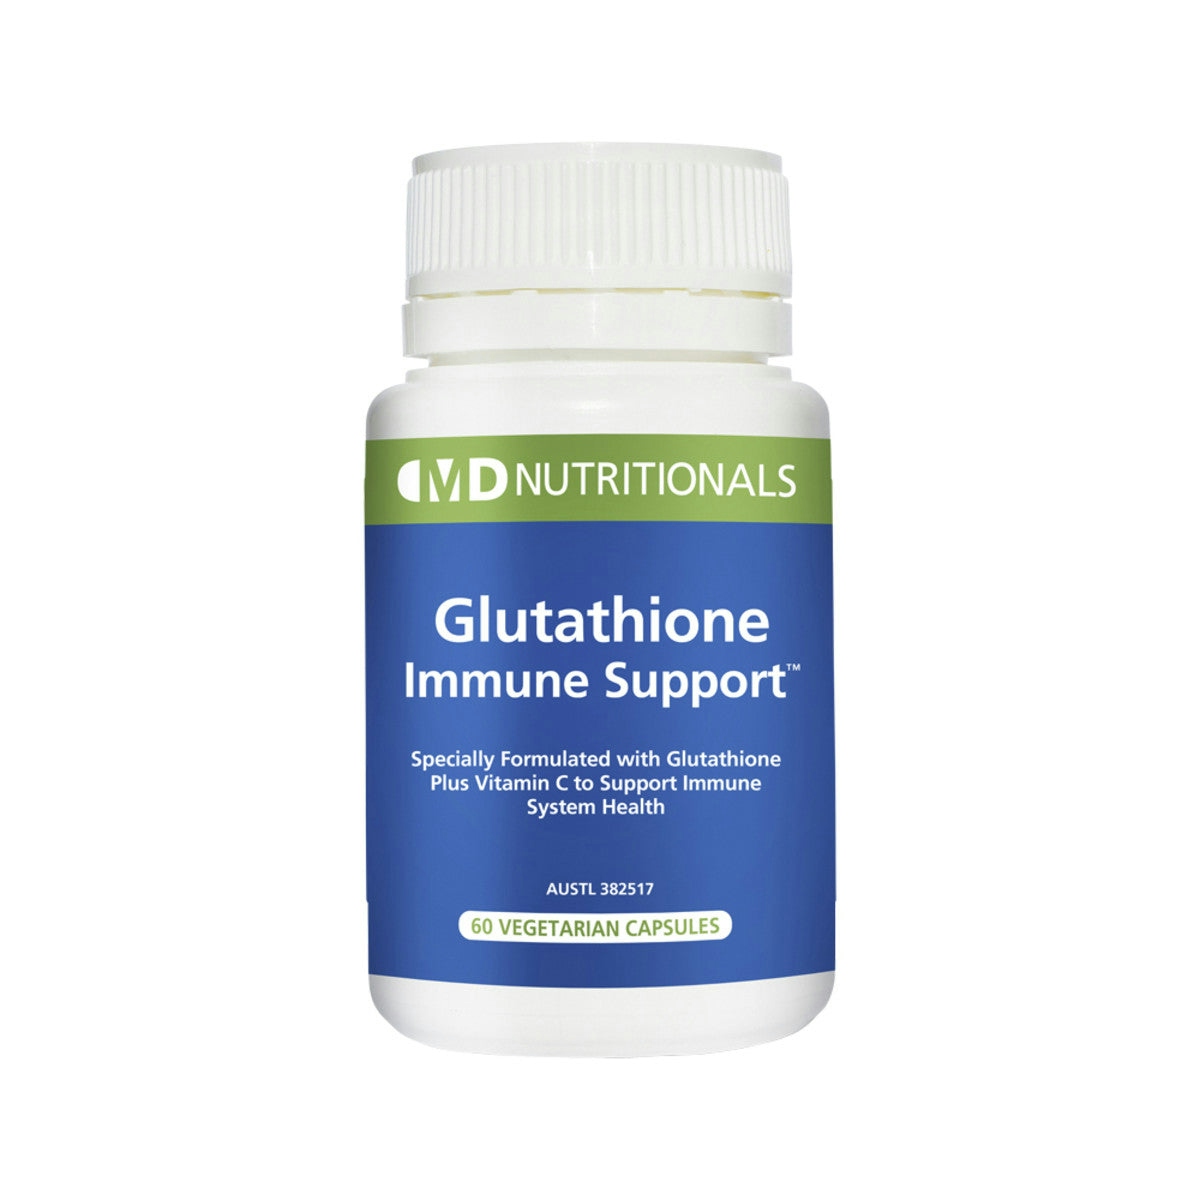 image of MD Nutritionals Glutathione Immune Support 60vc on white background 